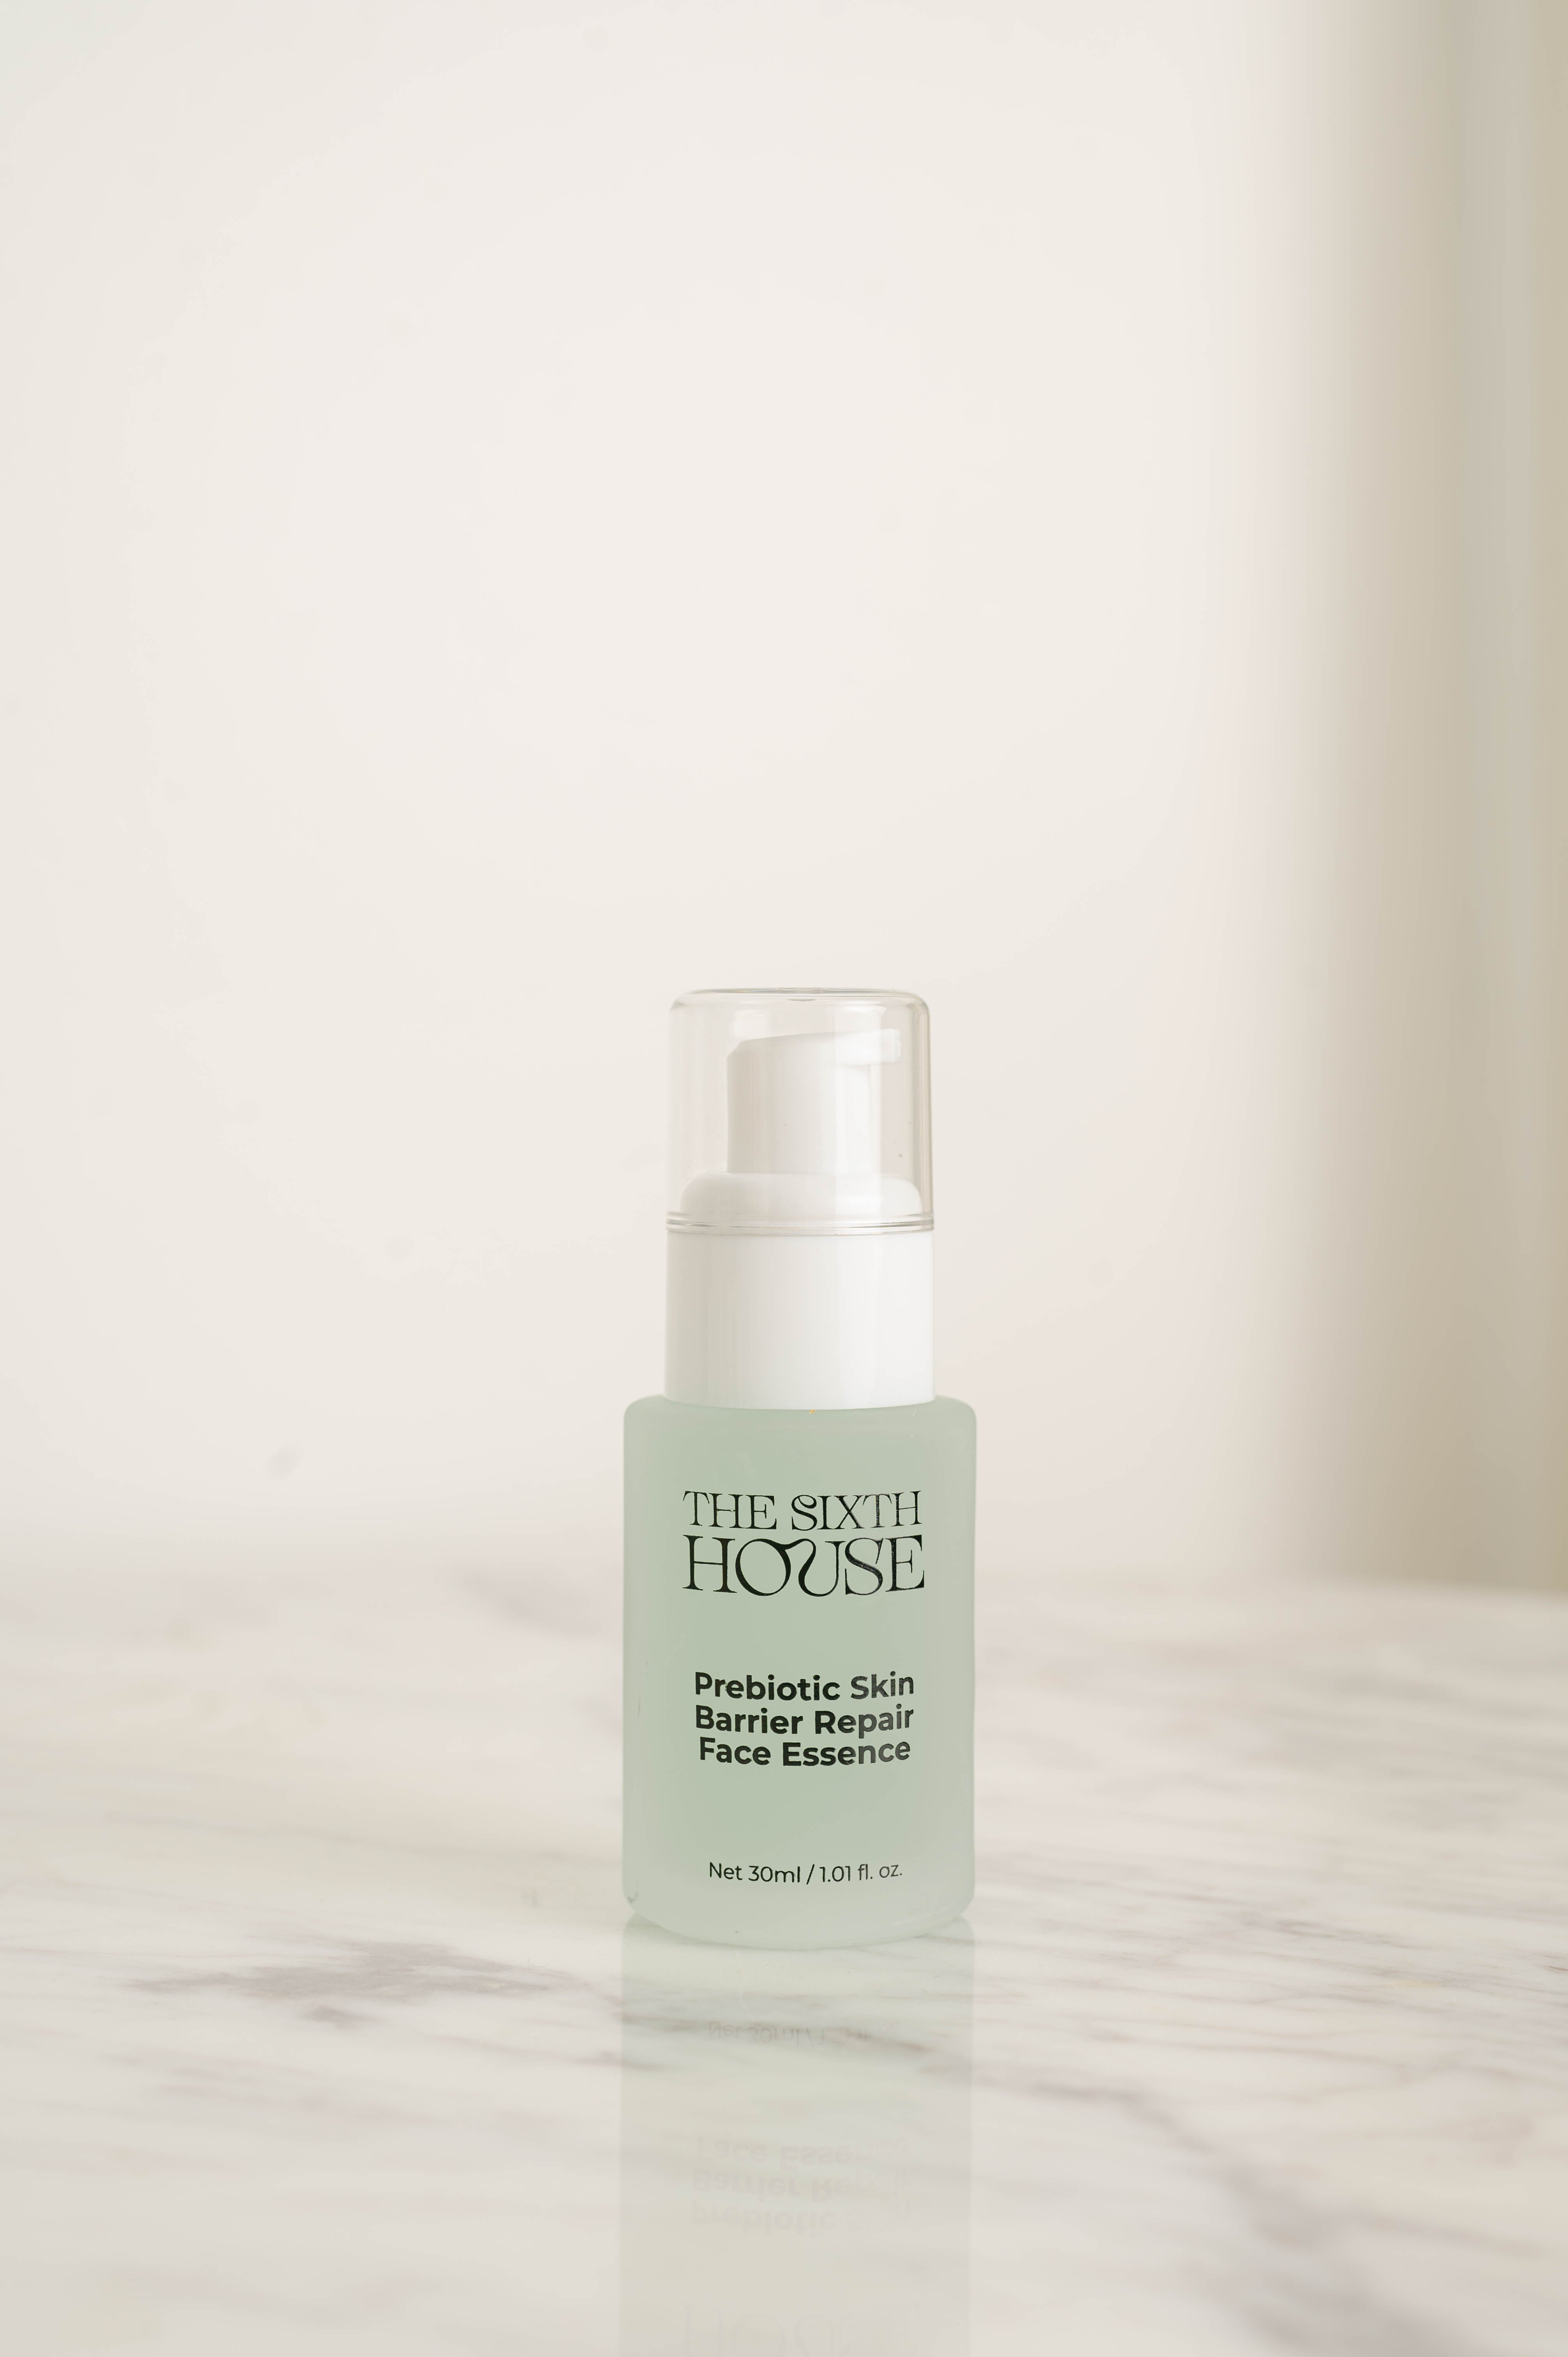 Prebiotic skin barrier repair face essence by The Sixth House